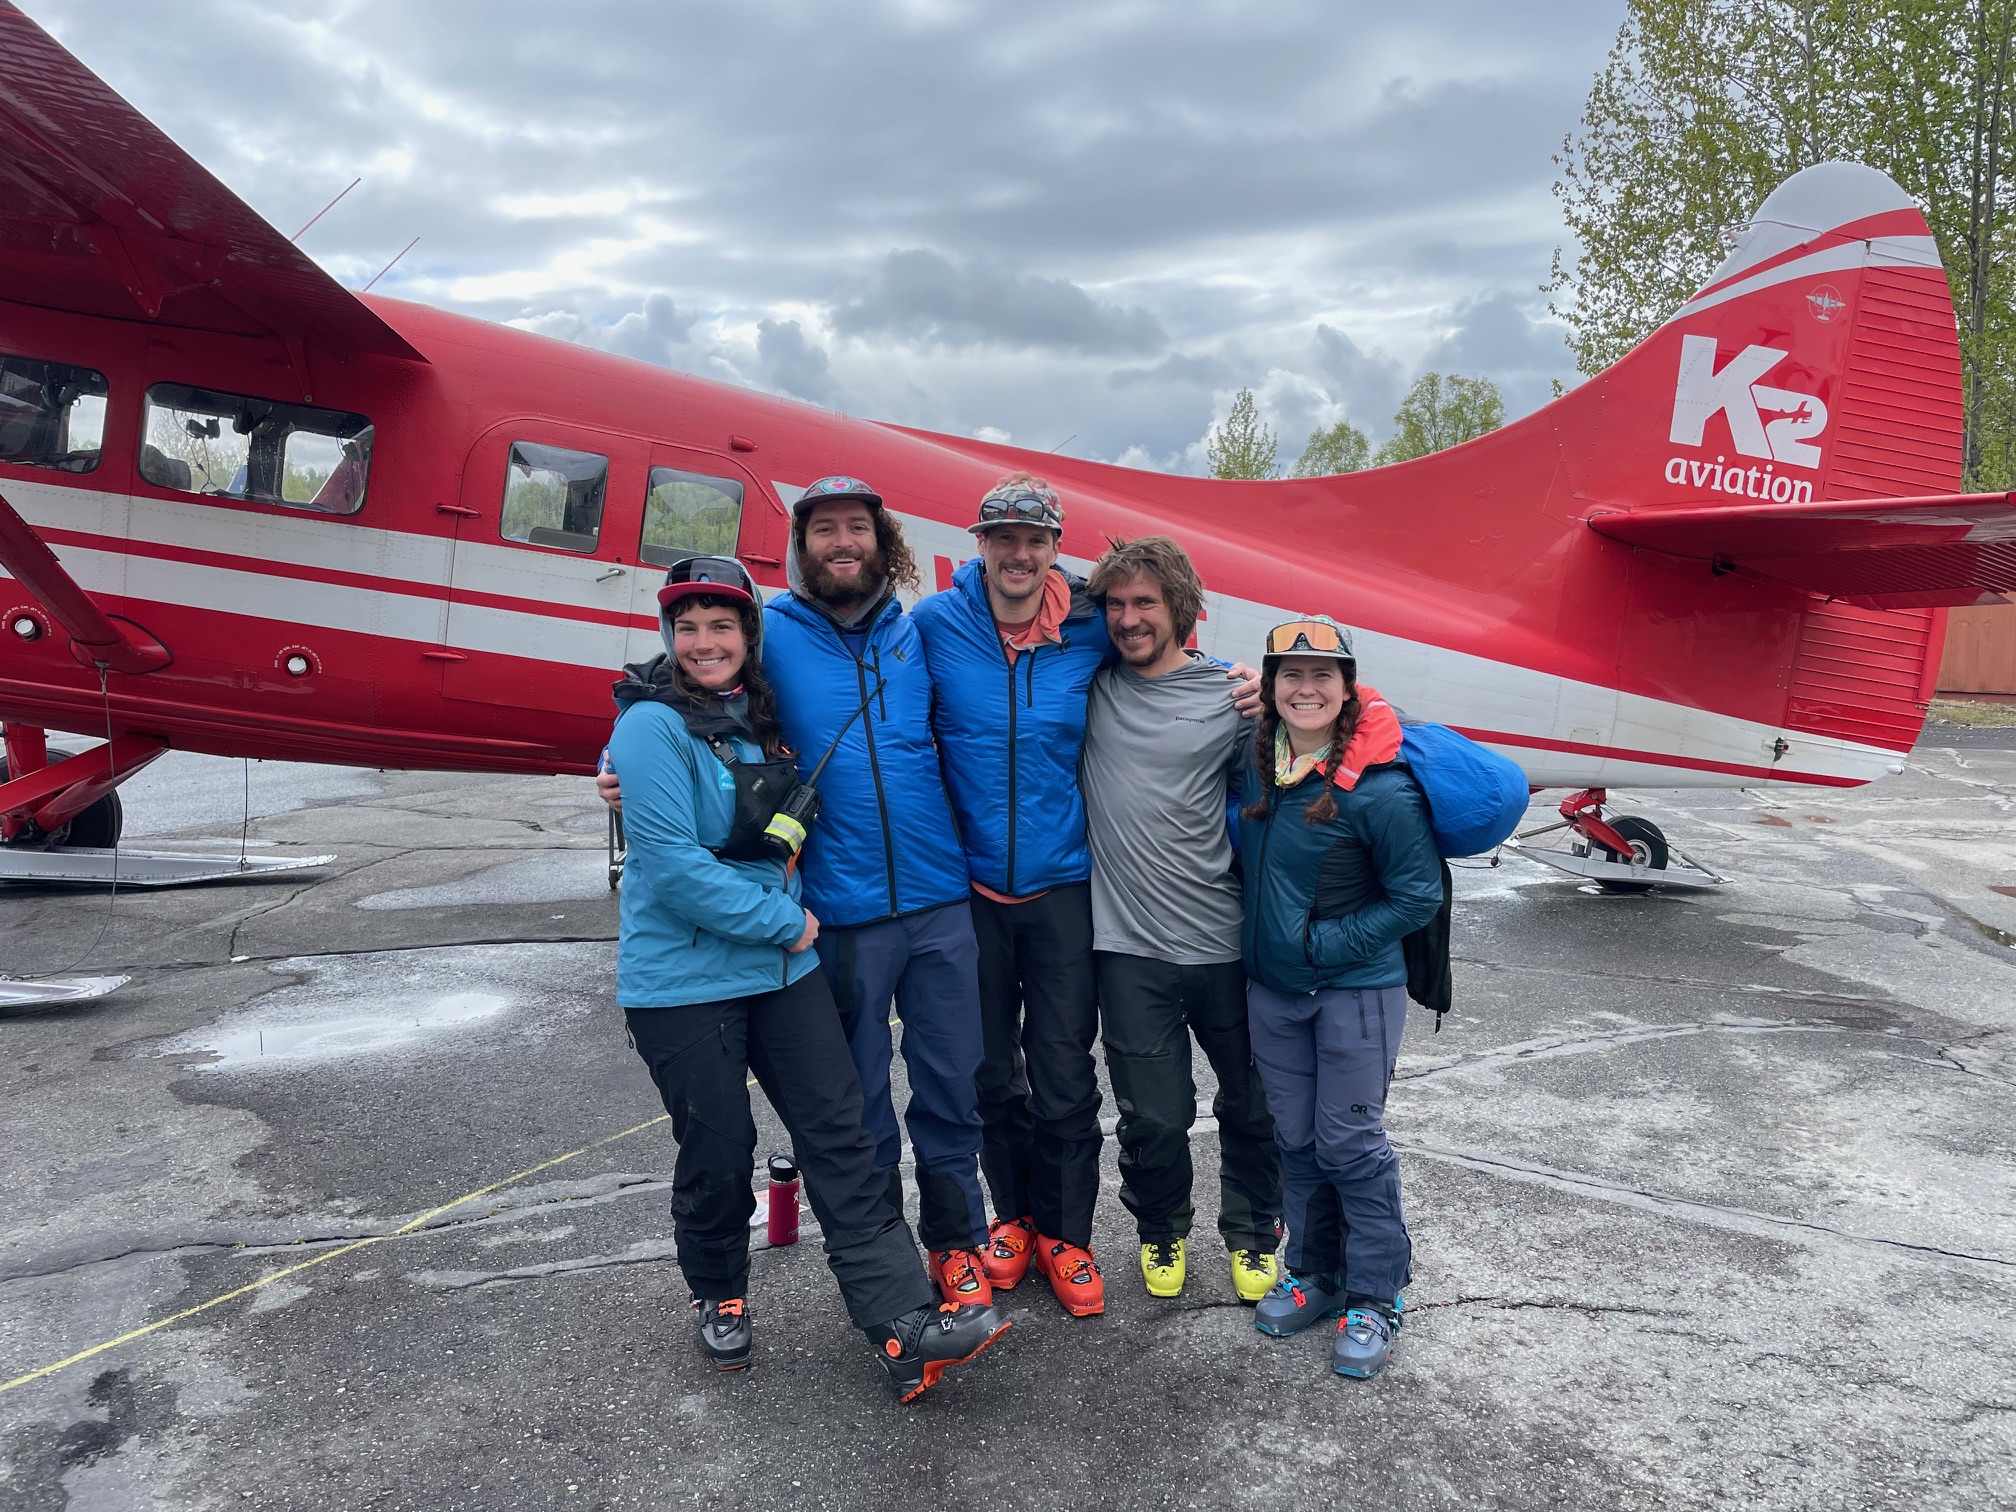 Five climbers huddle for a photo in front of a red and white airplane